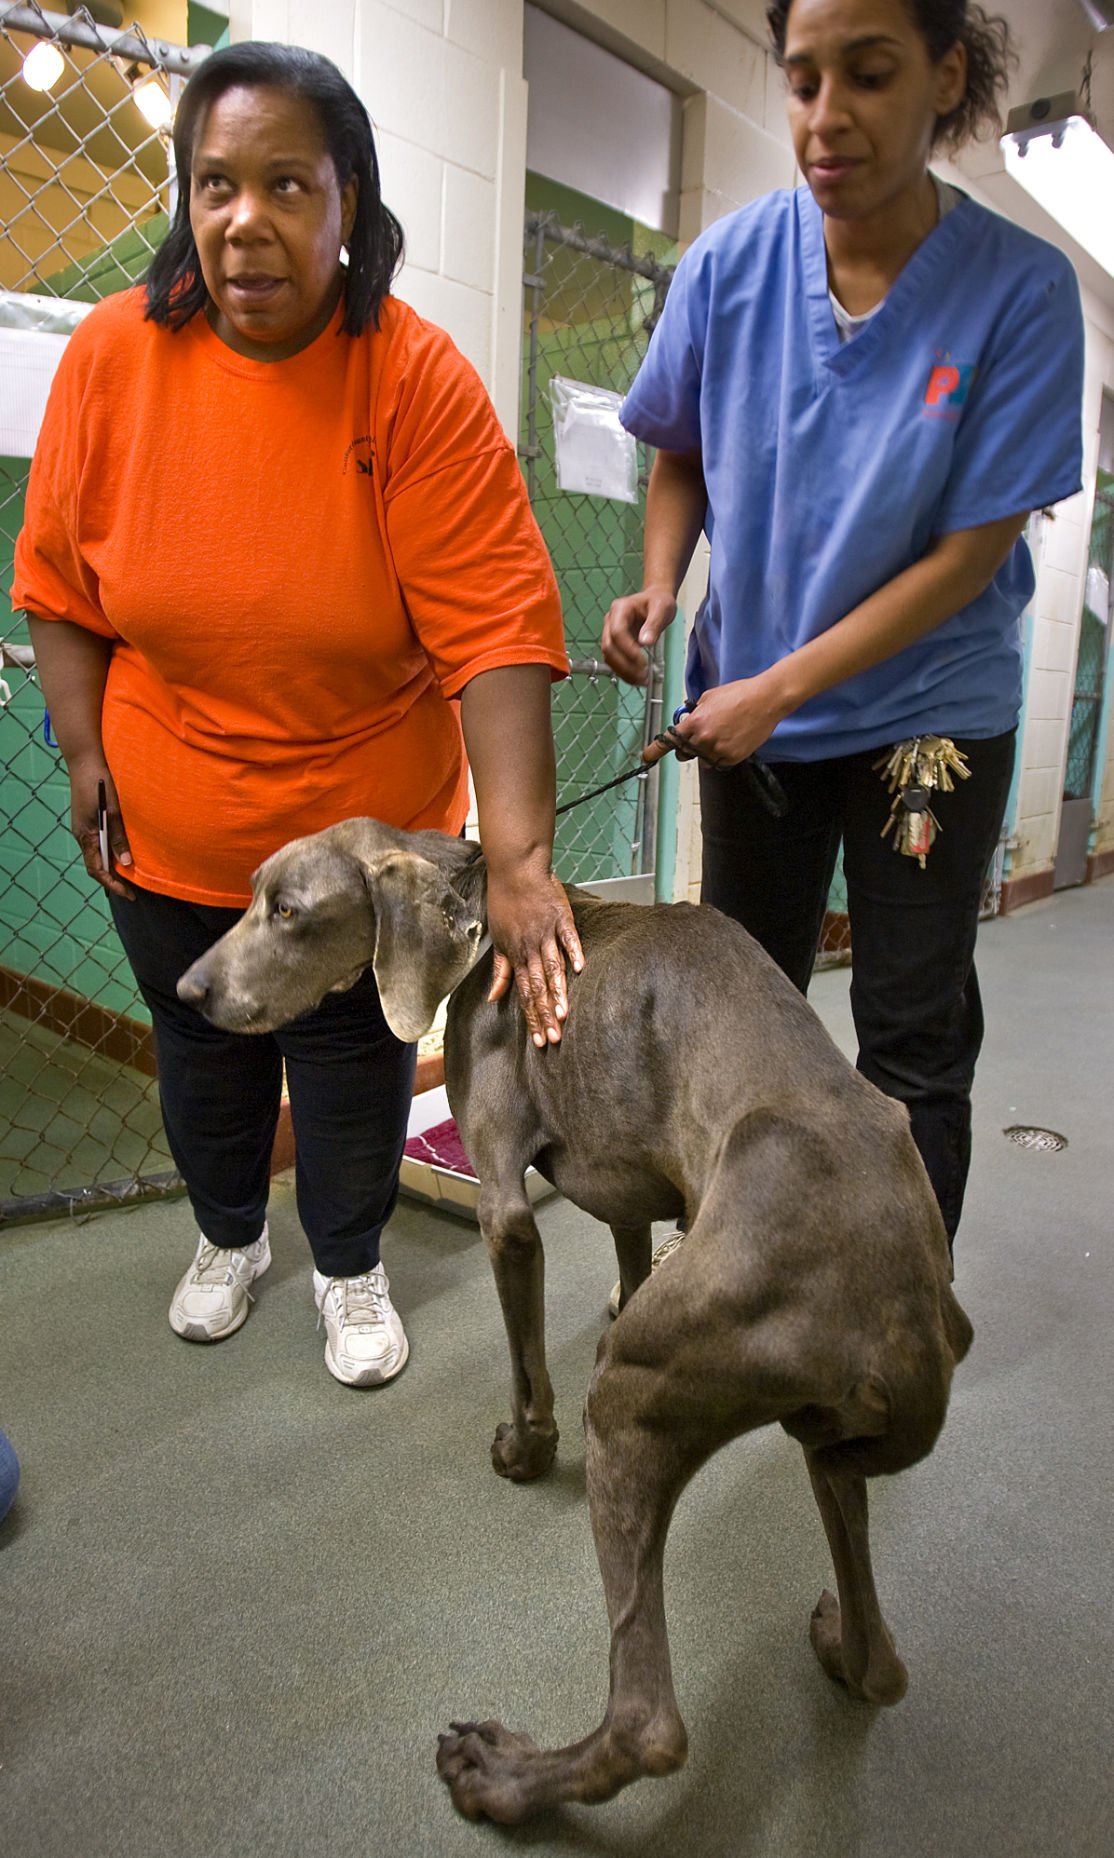 97 Dogs Seized At Kennel Latest News Greensboro Com